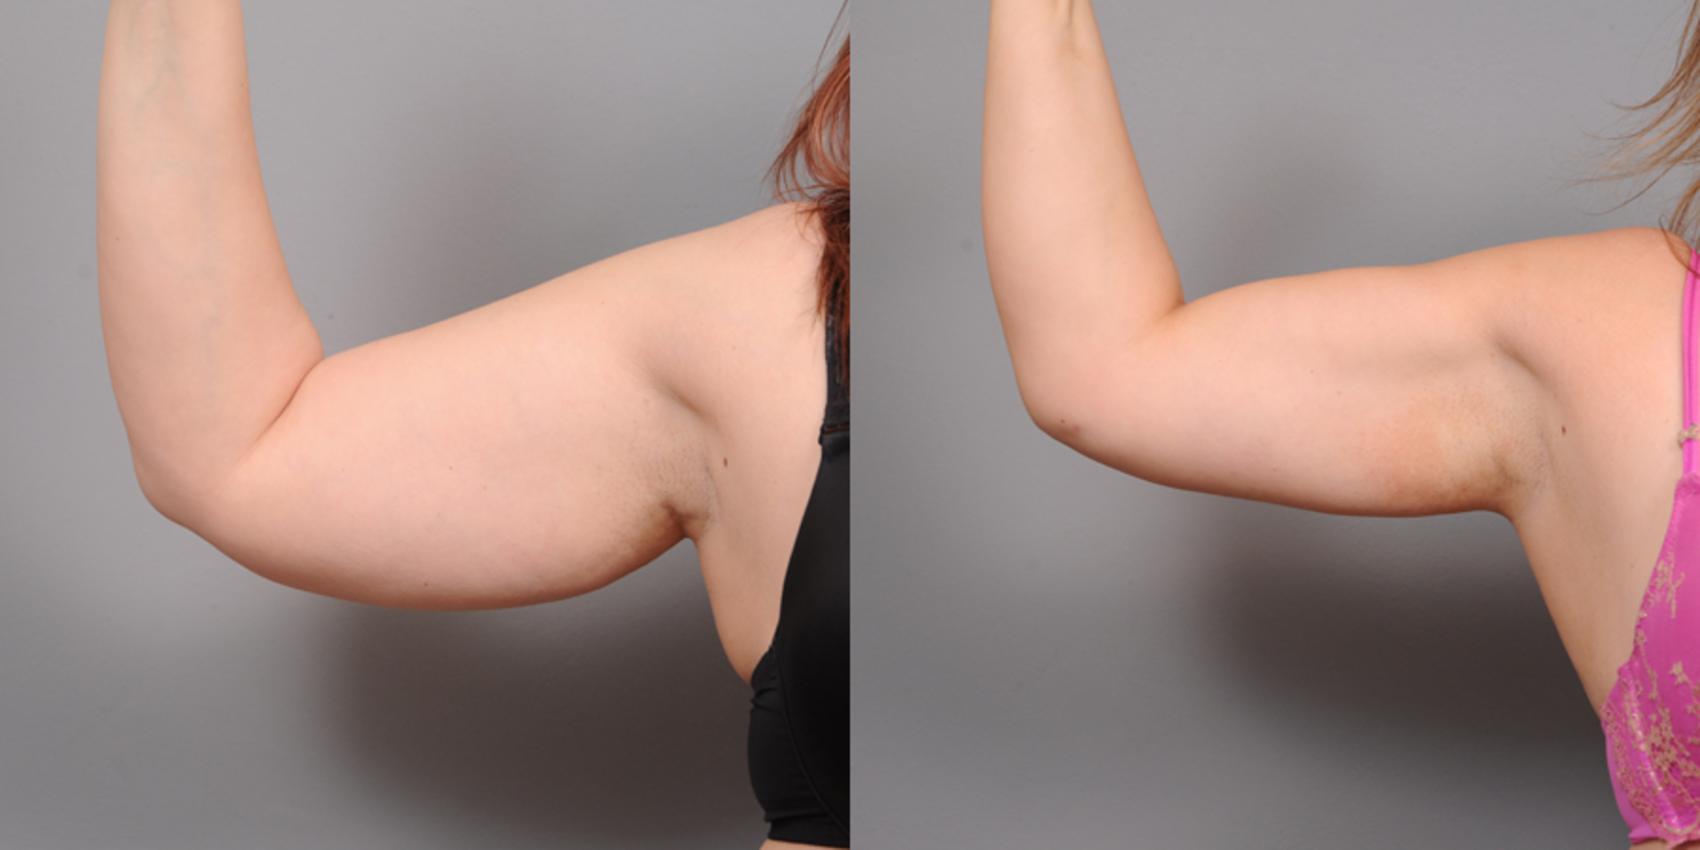 Arm Liposuction in New York City - Dr. Thomas Sterry